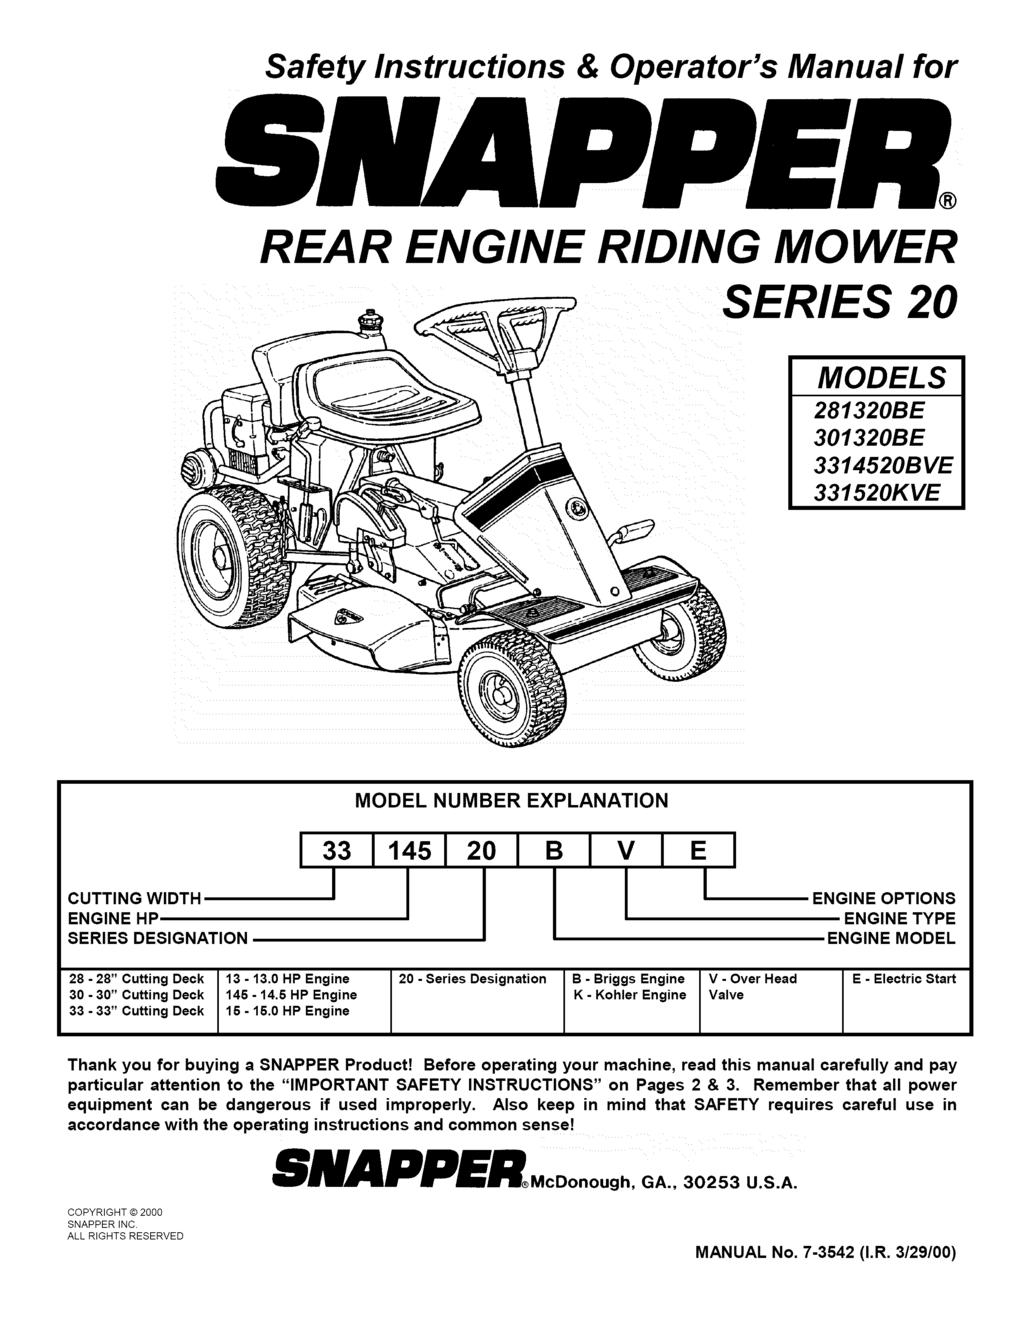 Safety Instructions & Operator's Manual for REAR ENGINE RIDING MOWER SERIES 20 MODELS 281320BE 301320BE 3314520BVE 331520KVE CUTTING WIDTH ENGINE HP SERIES DESIGNATION MODEL NUMBER EPLANATION I